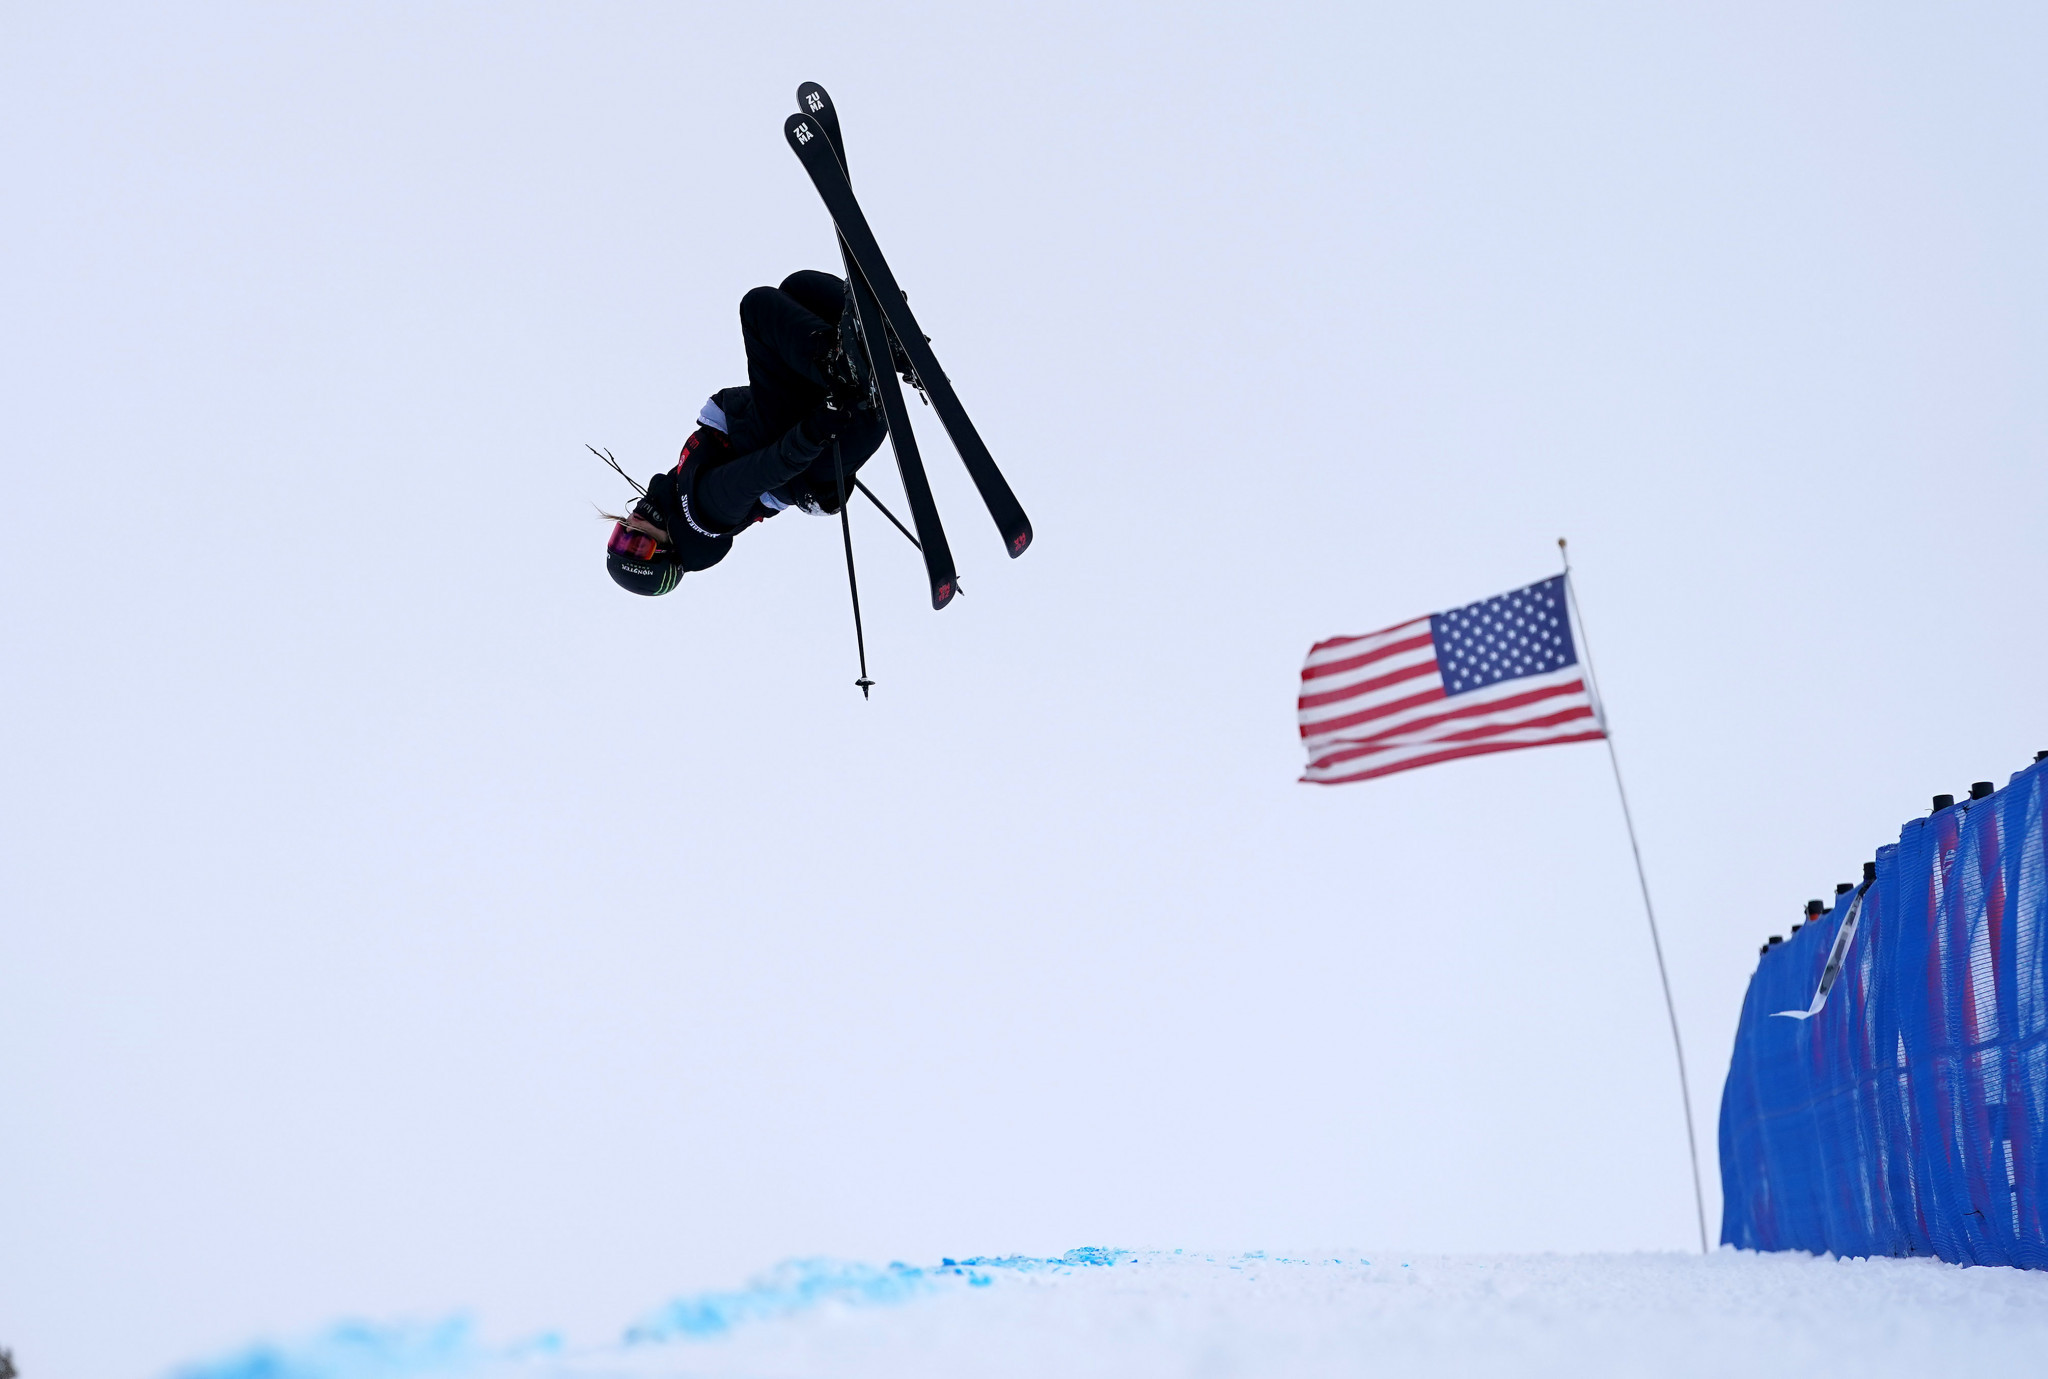 Cassie Sharpe led the women's freestyle skiing halfpipe qualifiers but no action was possible today ©Getty Images